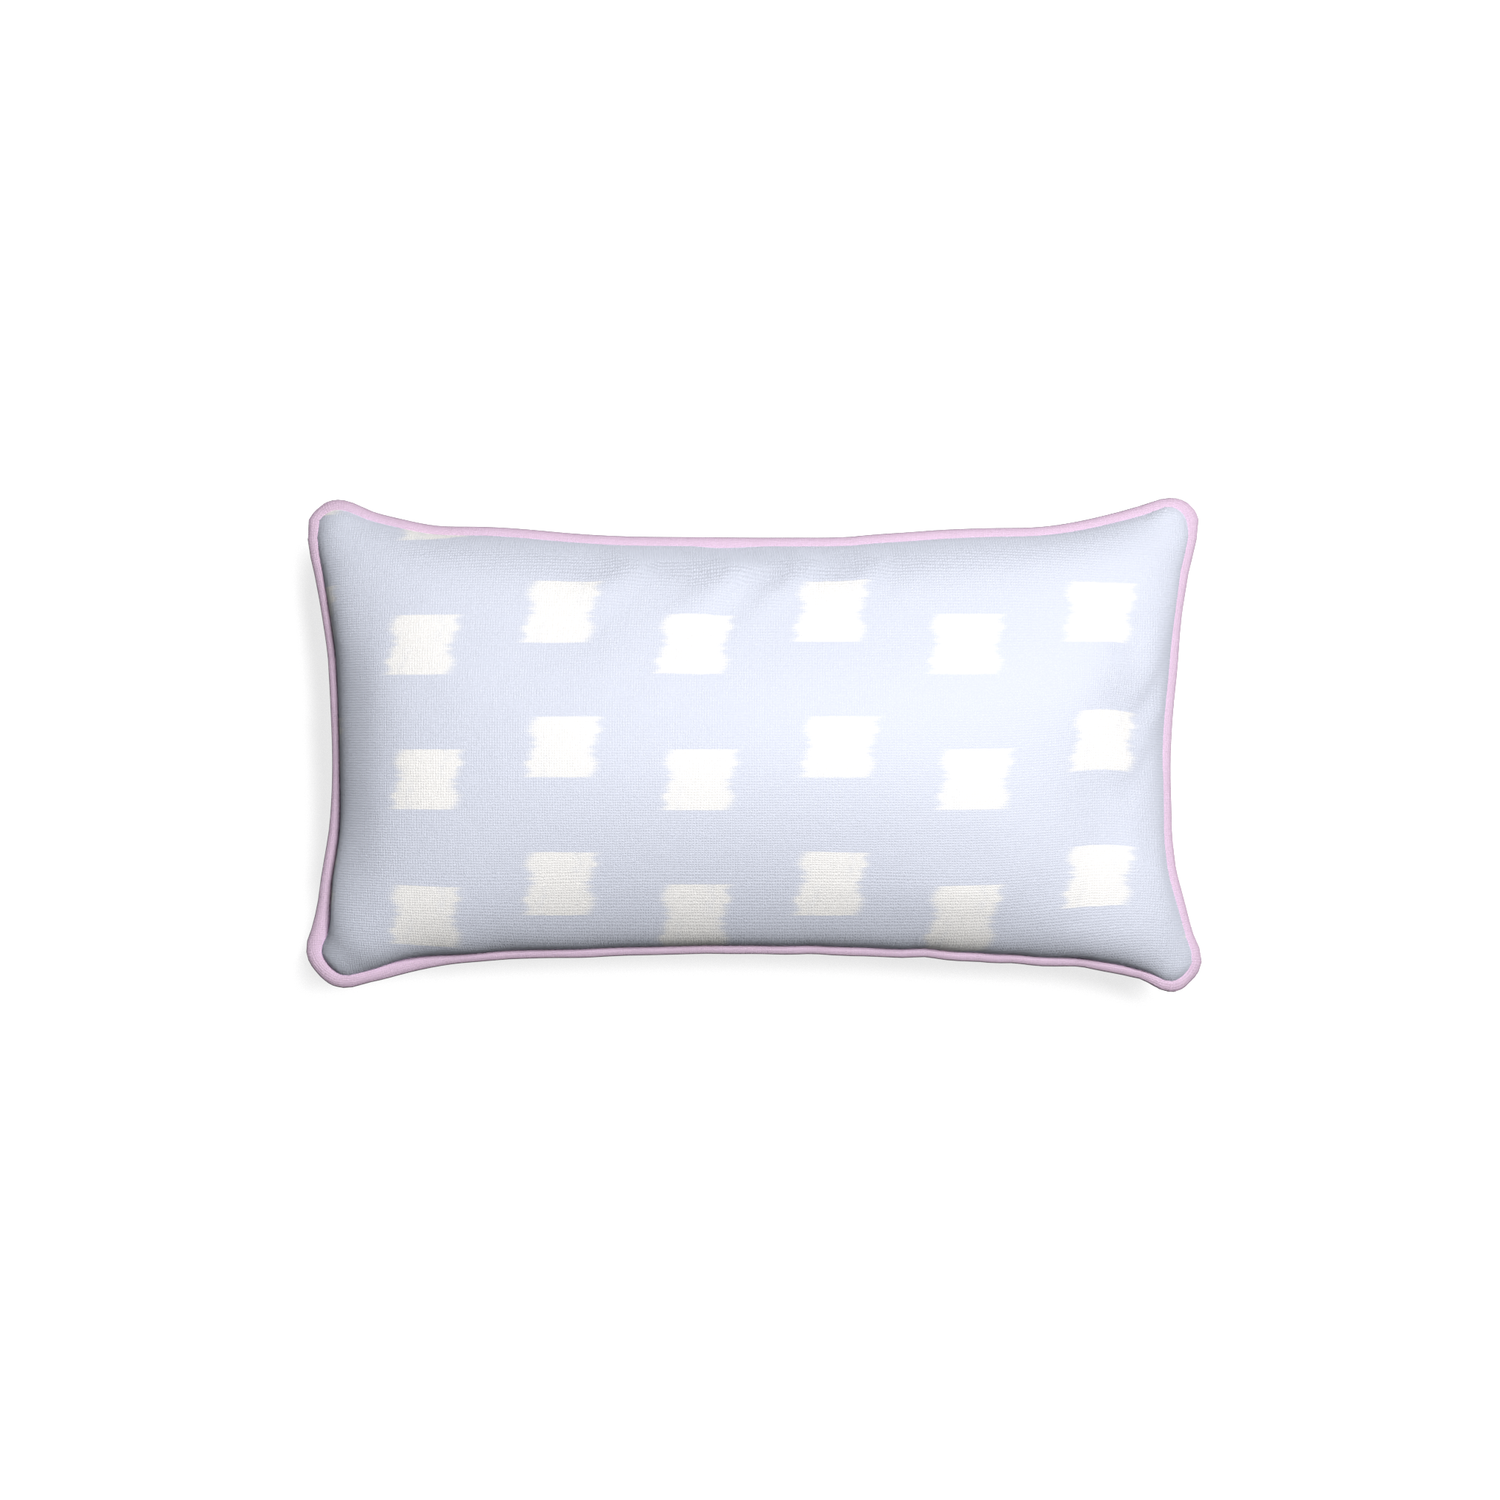 Petite-lumbar denton custom sky blue patternpillow with l piping on white background